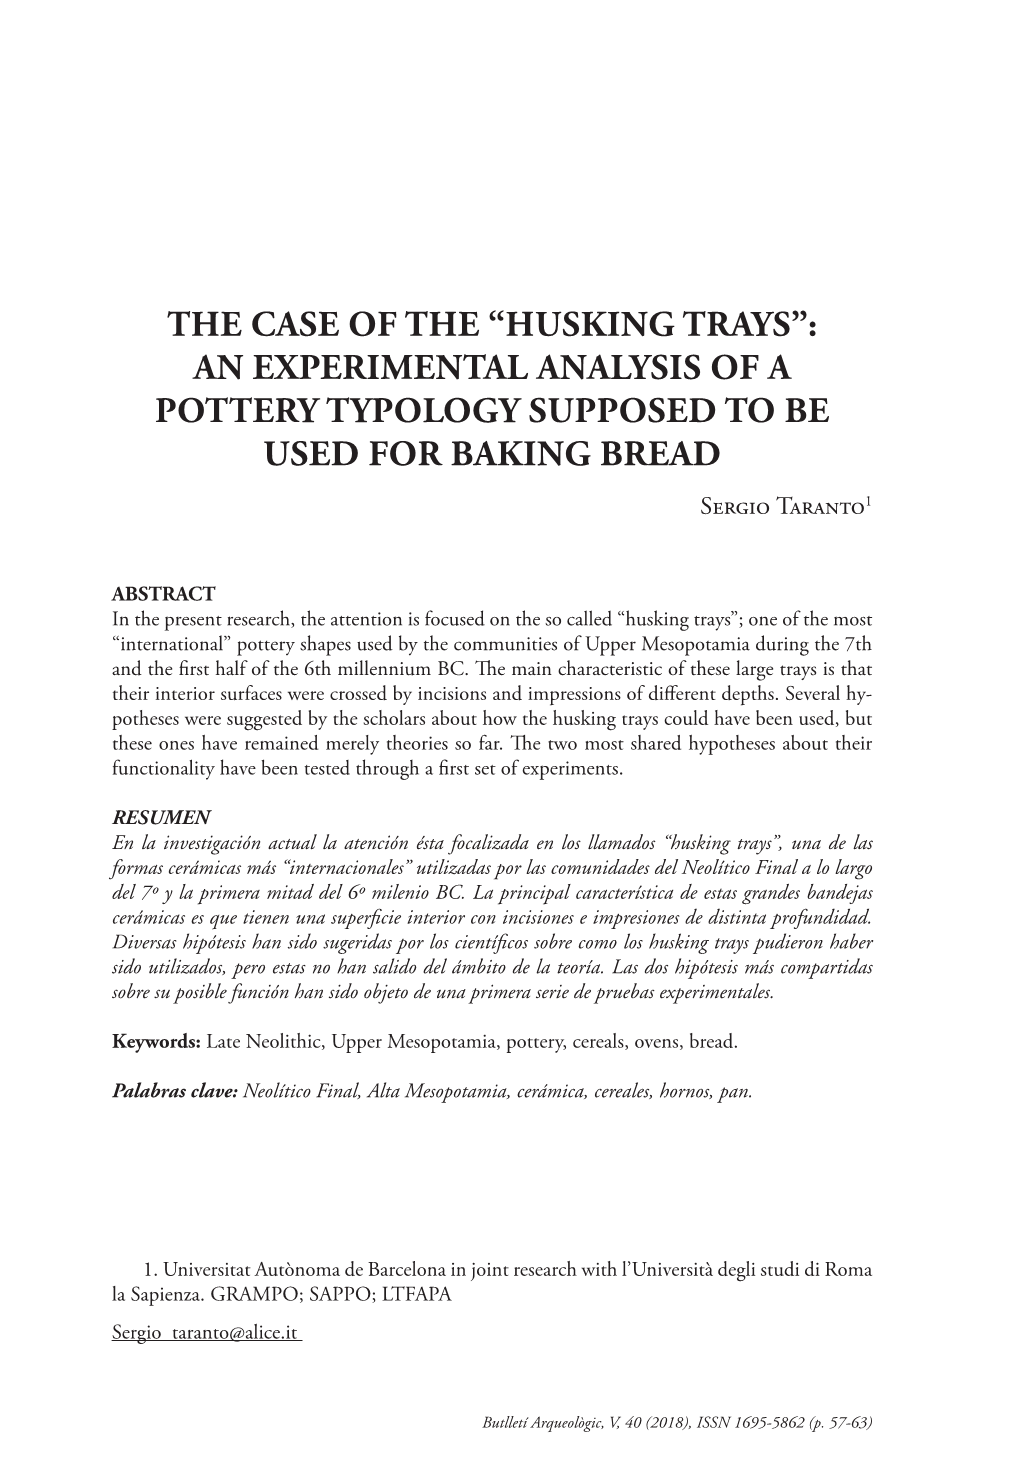 THE CASE of the “HUSKING TRAYS”: an EXPERIMENTAL ANALYSIS of a POTTERY TYPOLOGY SUPPOSED to BE USED for BAKING BREAD Sergio Taranto1